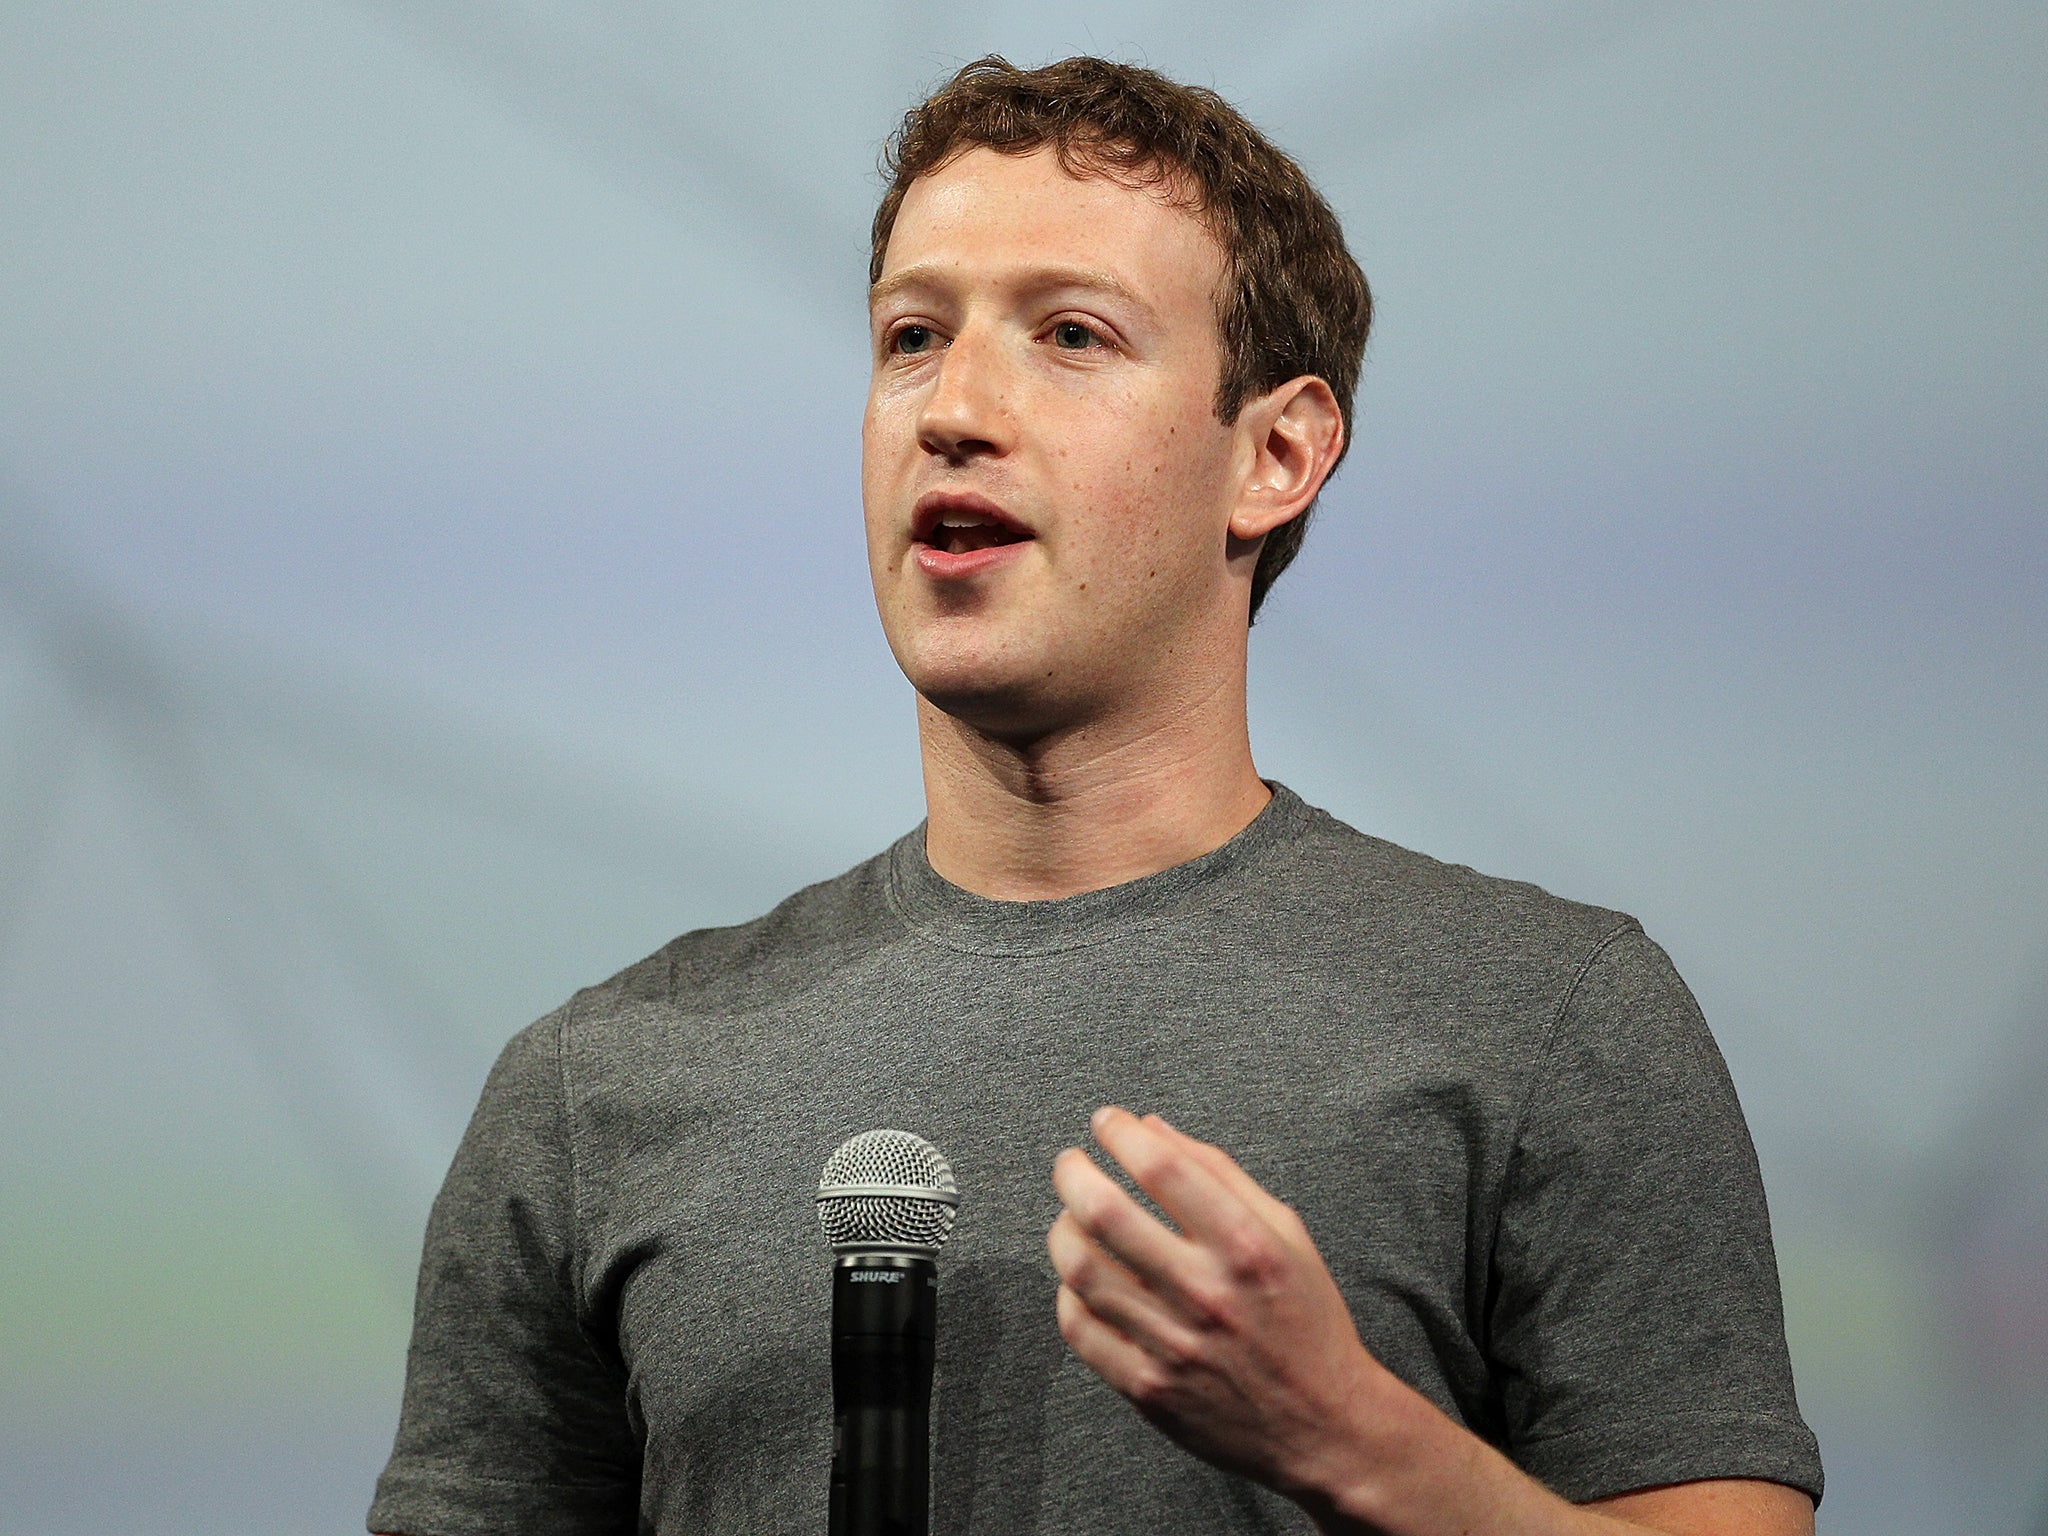 It took Mark Zuckerberg just a year to make the leap from self-made millionaire to billionaire